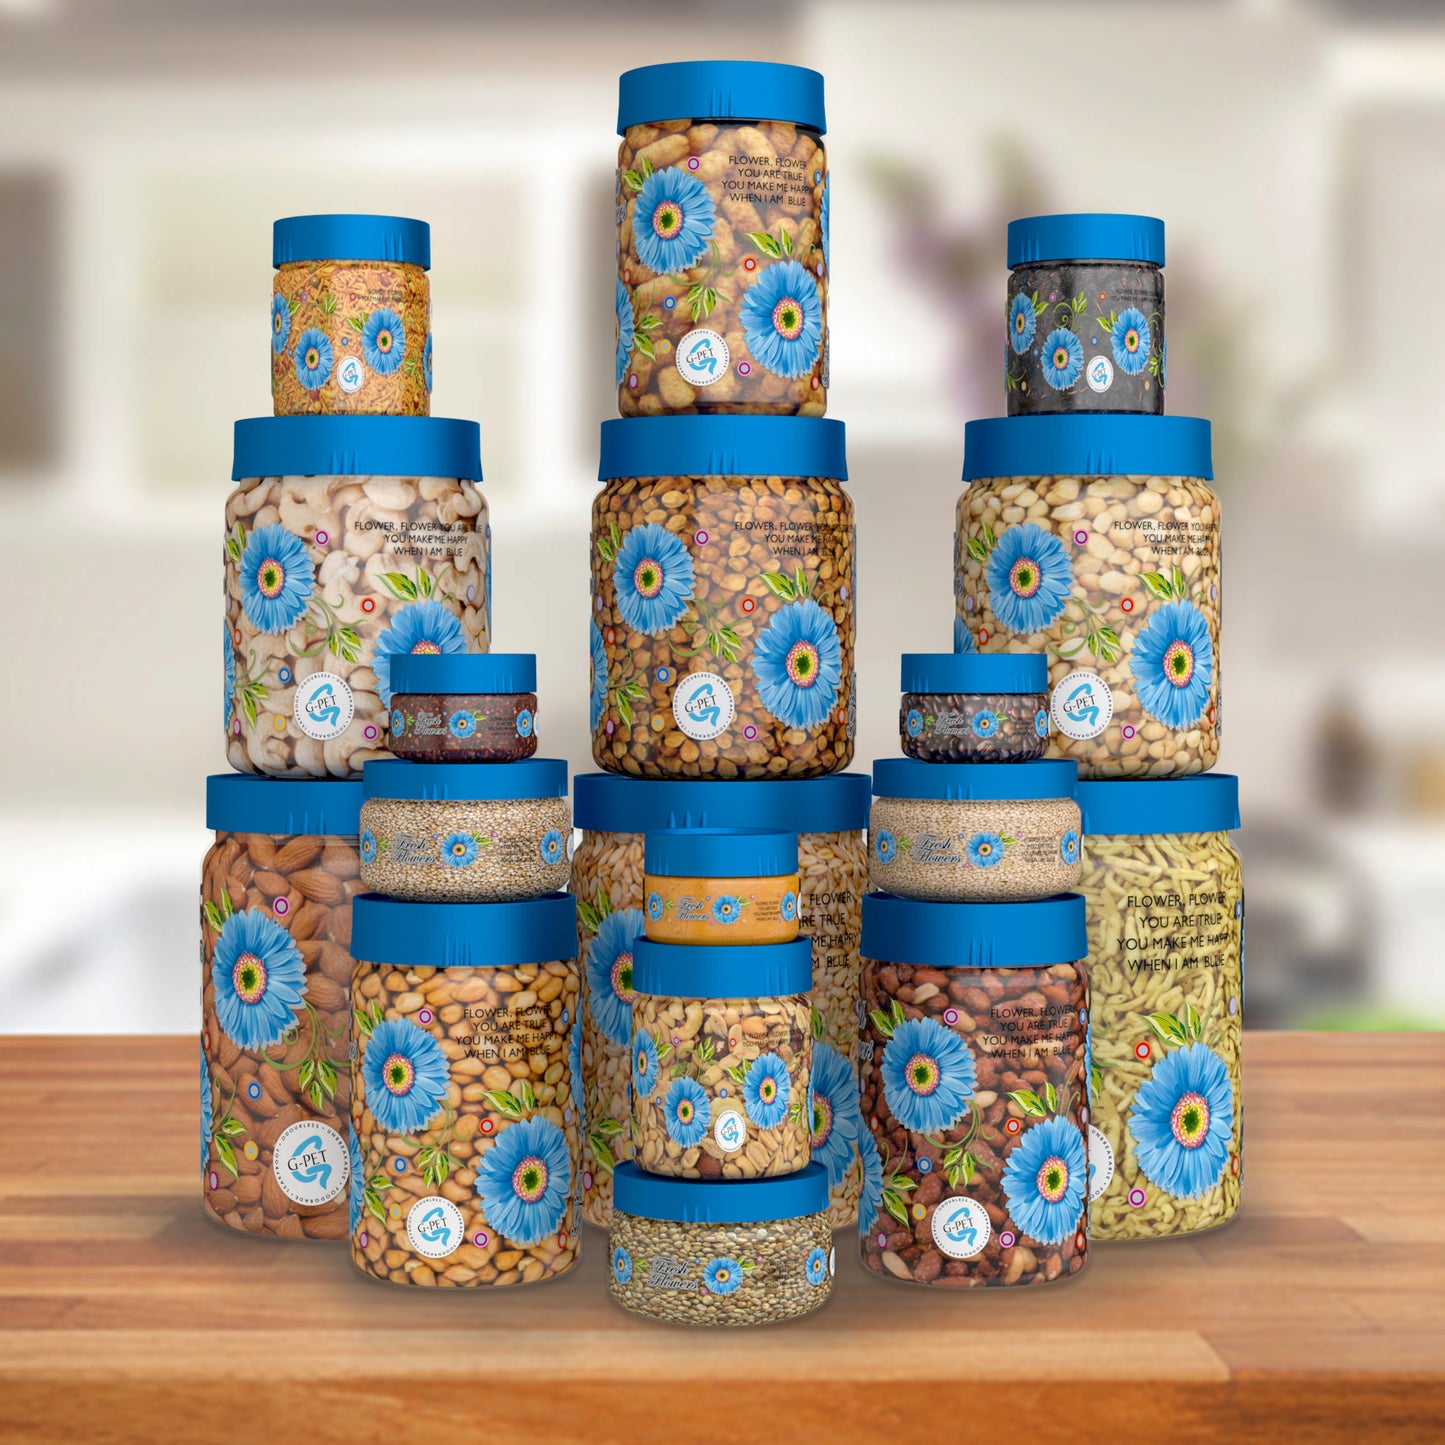 Print Magic Container Blue Pack of 18 - 2000ml (3 pcs), 1000ml (3 pcs), 750ml (3 pcs), 200ml (3 pcs), 150ml (3 pcs), 50ml (3 pcs) Plastic Grocery Container